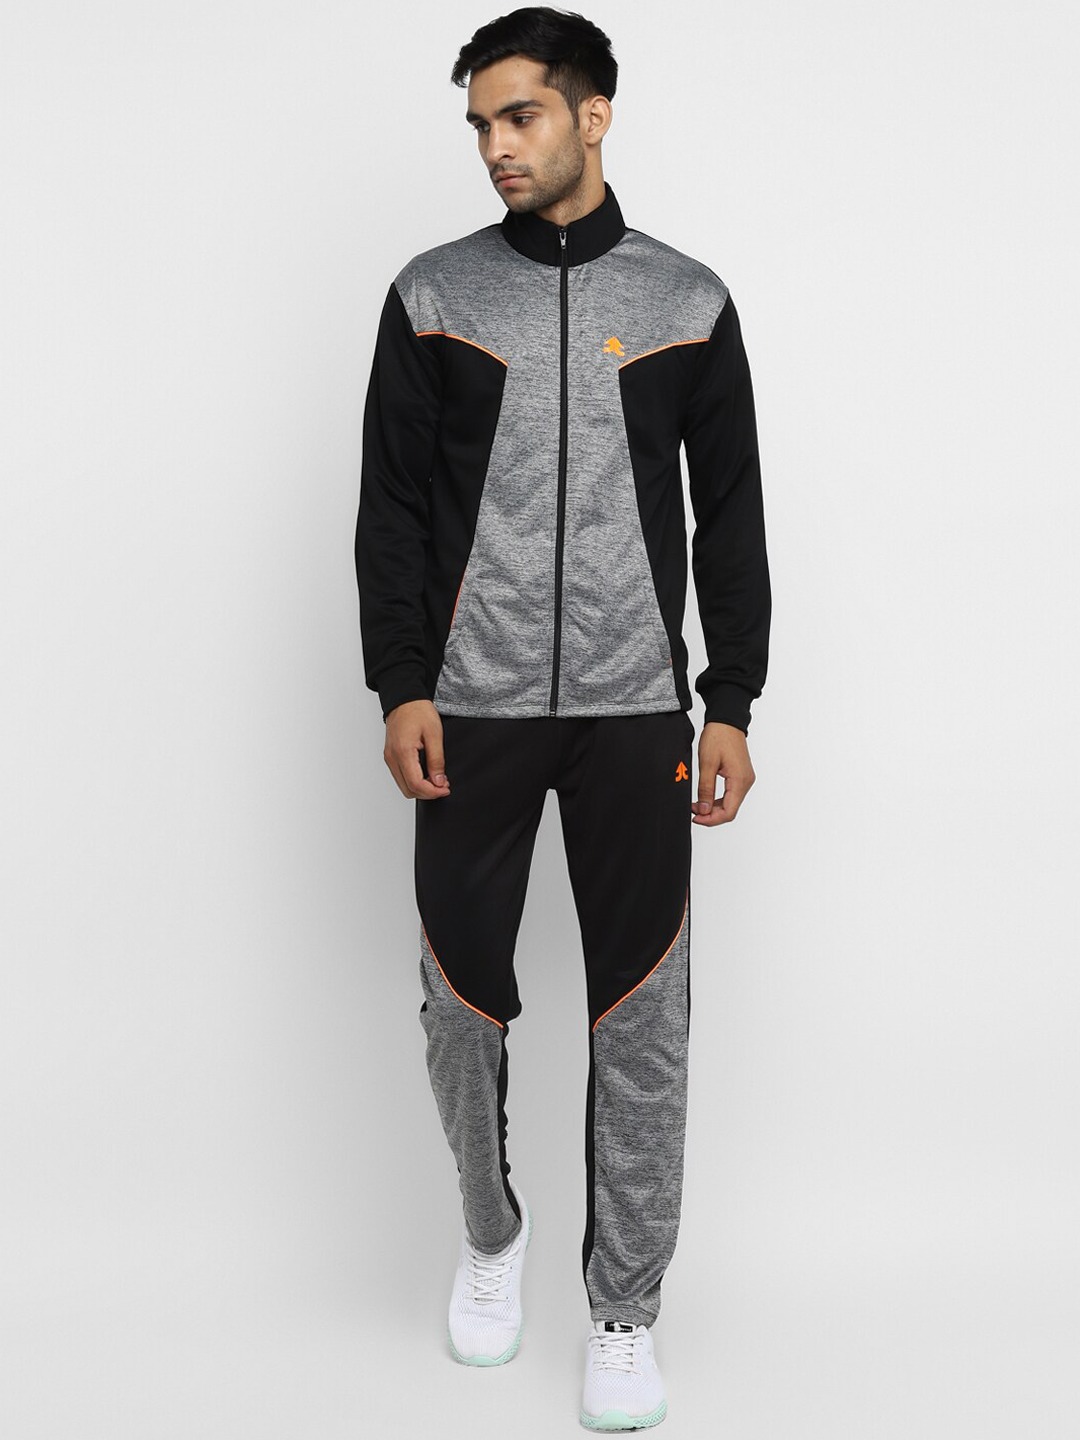 Clothing Tracksuits | OFF LIMITS Men Grey & Black Colourblocked Track Suit - LF41649